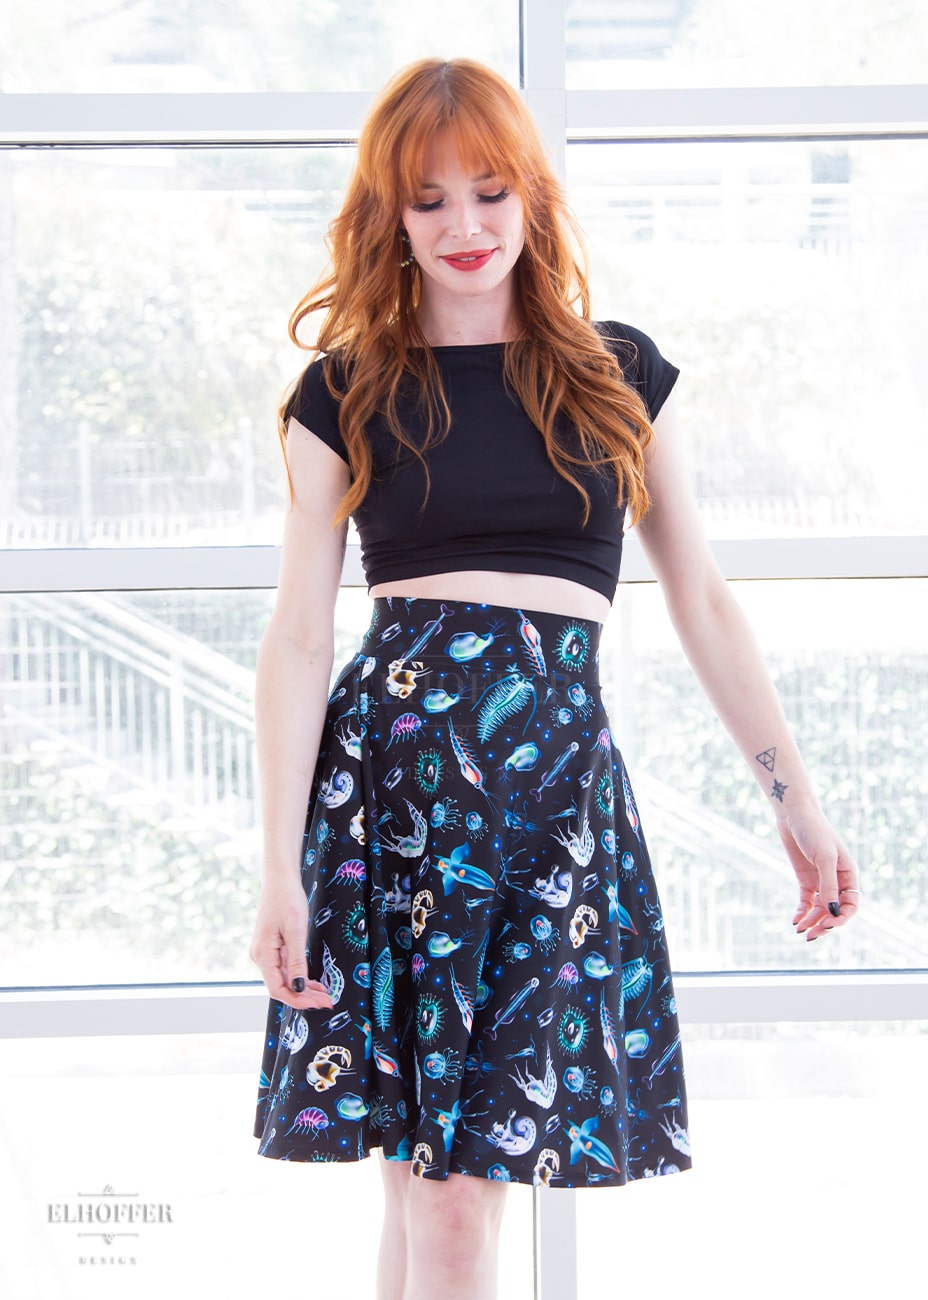 Chloe, a fair skinned size XS model with red hair and bangs, wears a high-waisted knee length full skirt with a fitted matching waistband encased with elastic in our not sea moths print. The print has various small sea creatures on a black background.